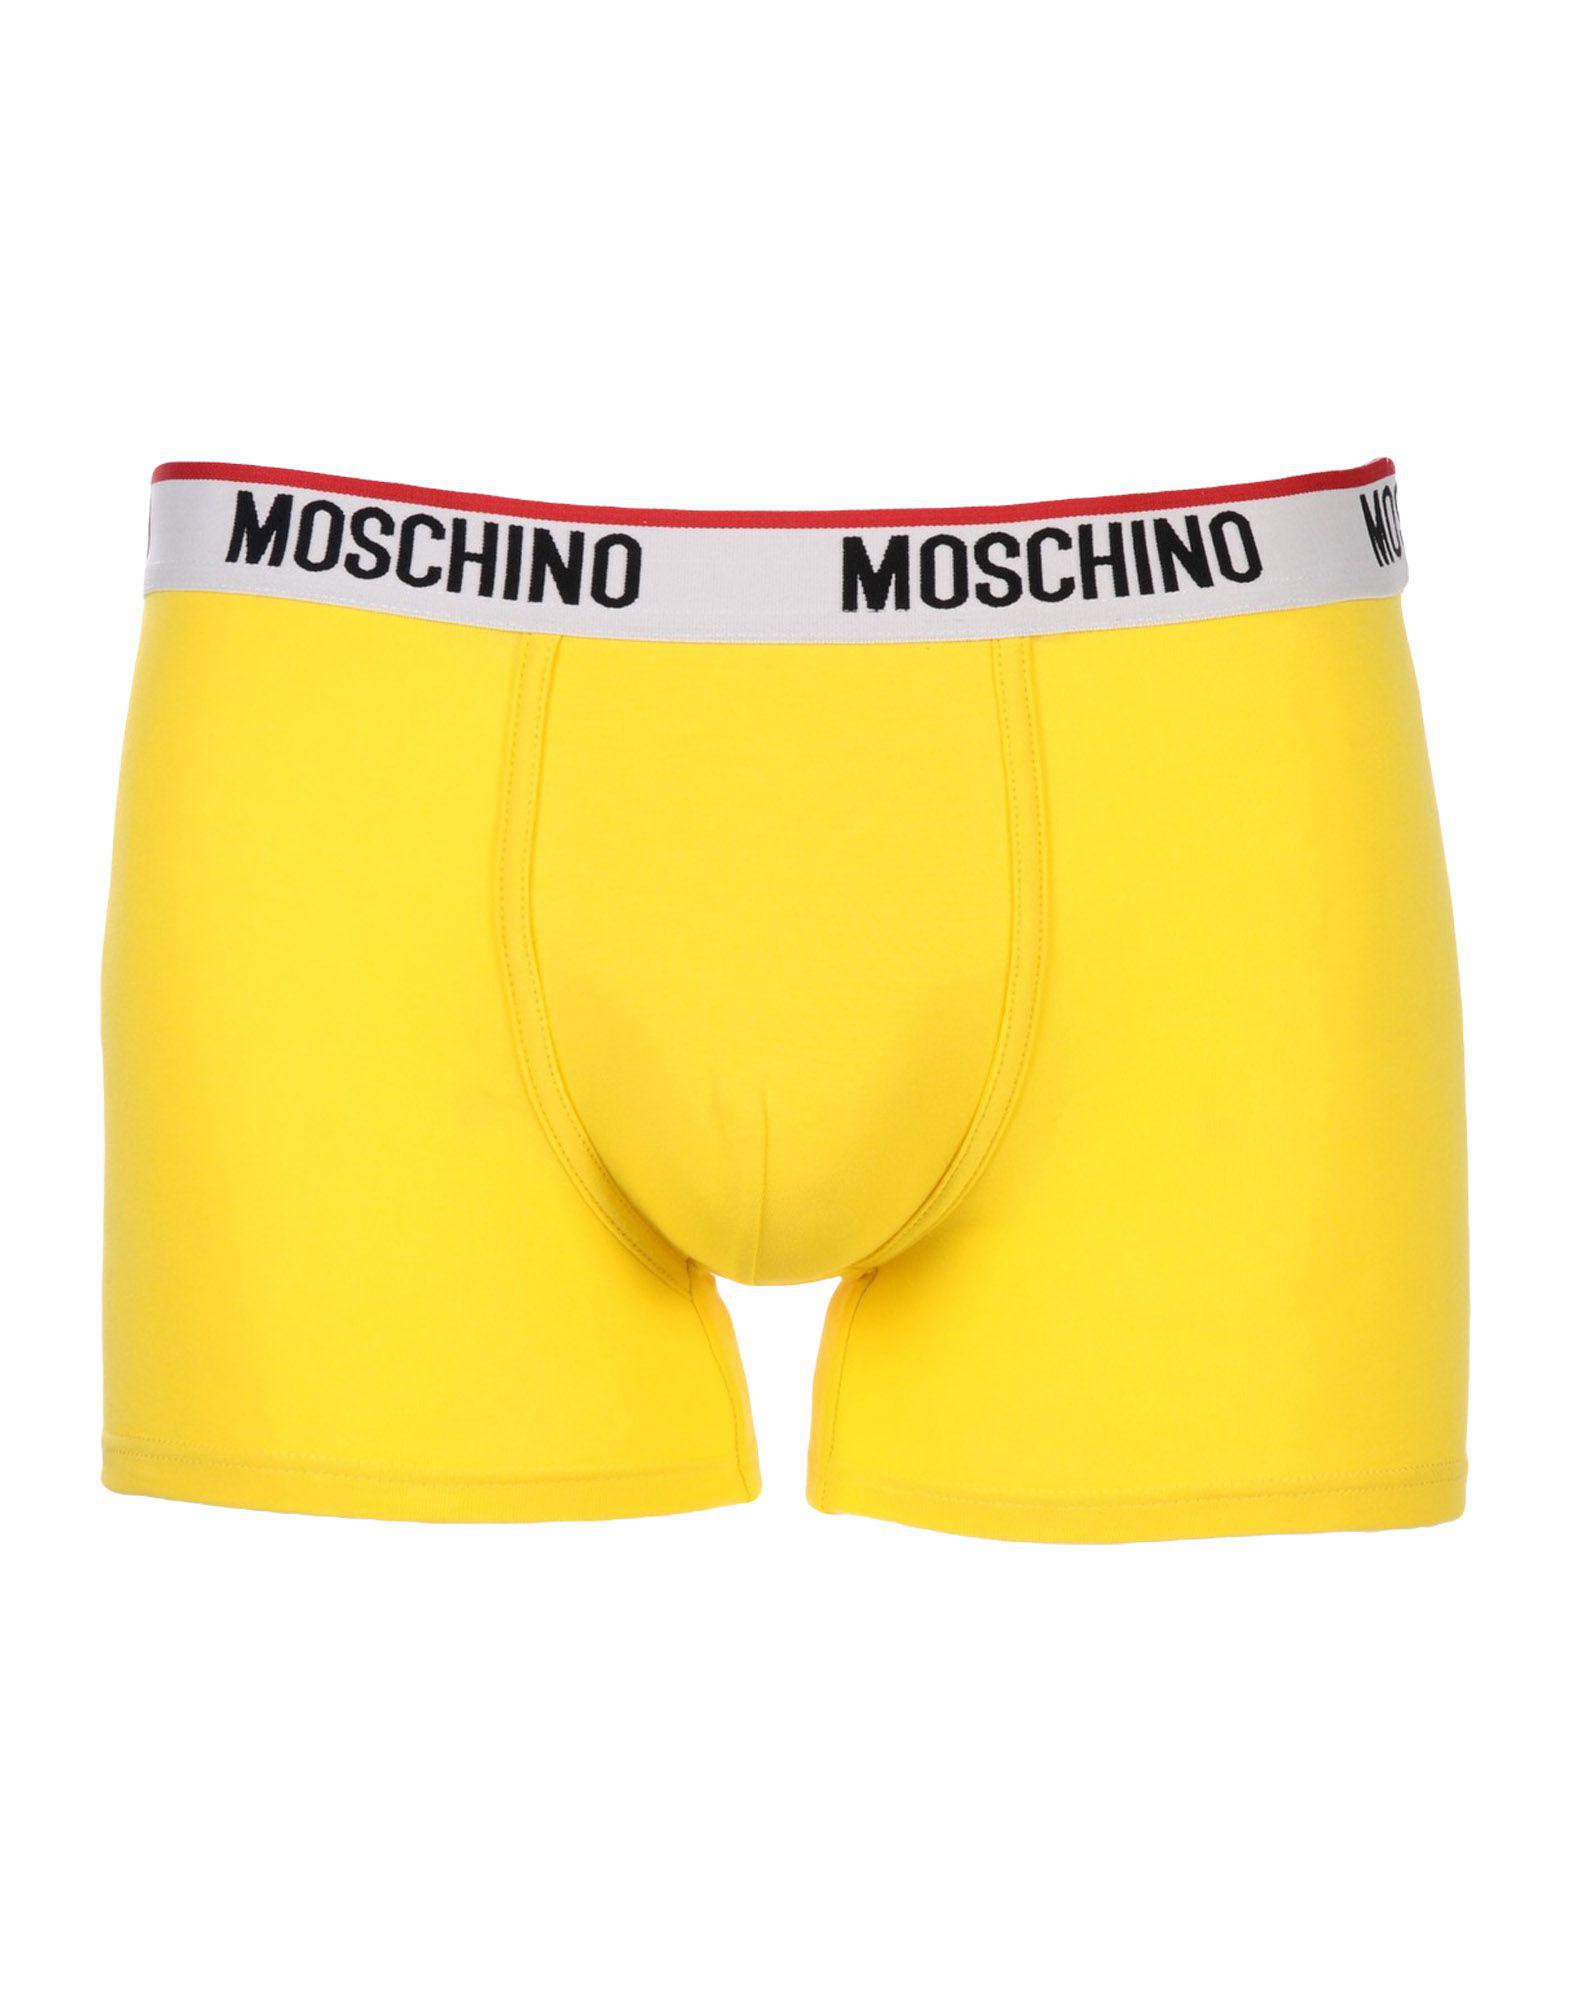 Moschino Cotton Boxer in Yellow for Men - Lyst